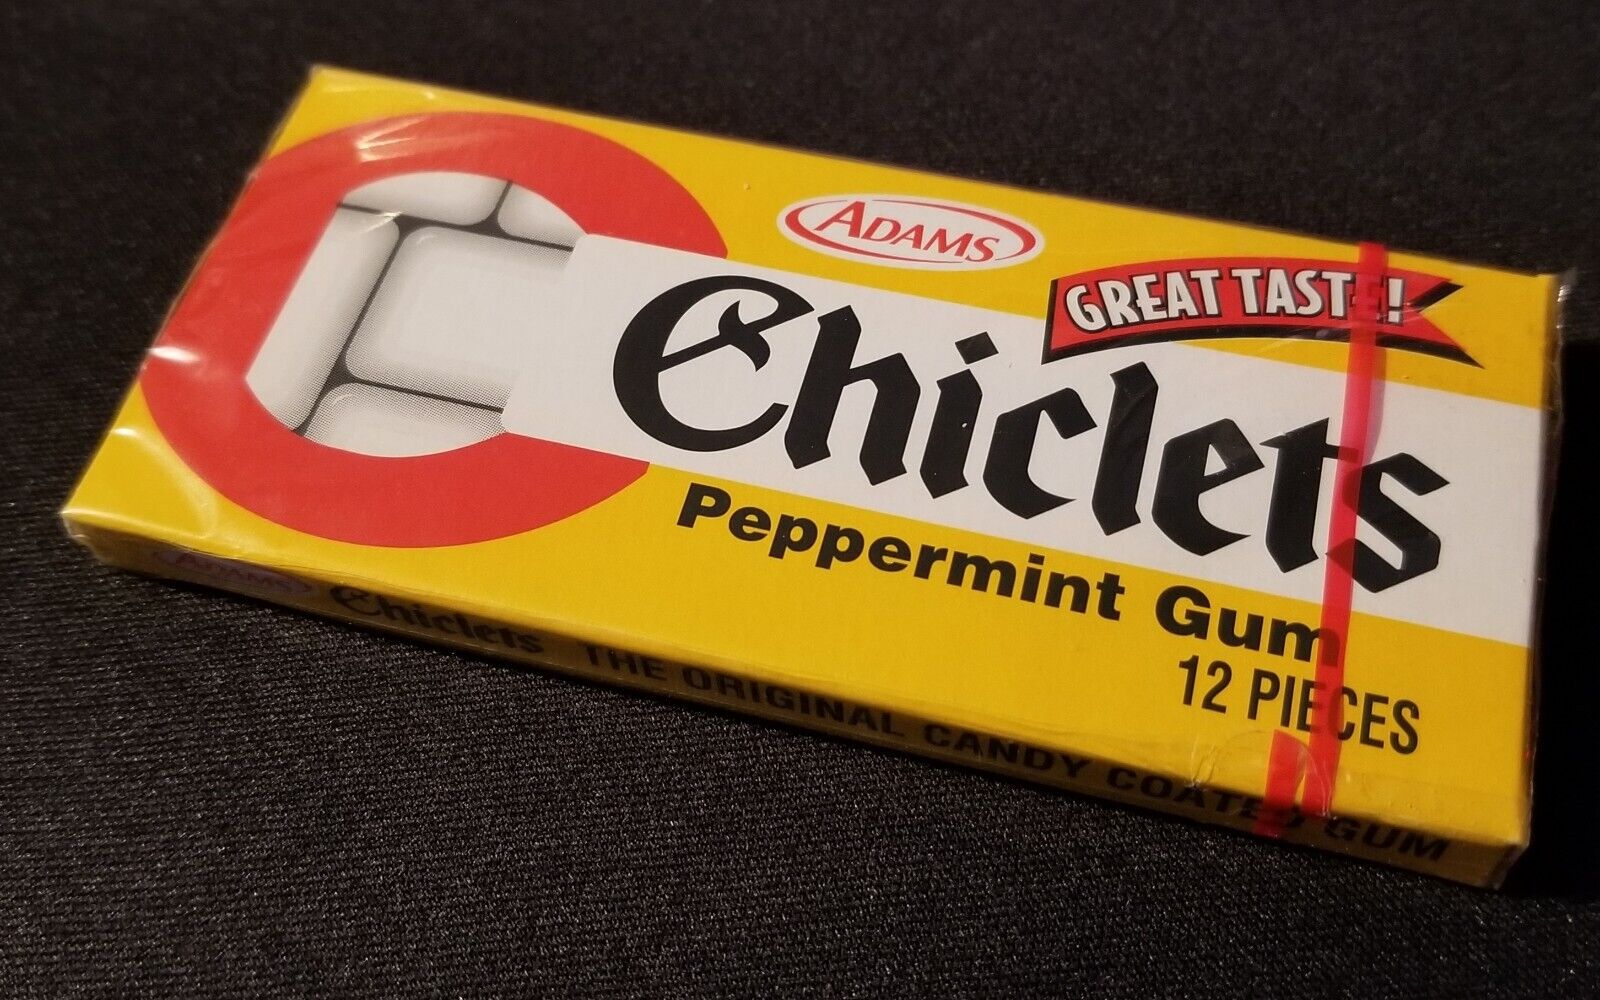 ONE PACK of Chiclets Peppermint 12pcs - SEALED GUM - prop - collectors - Adams